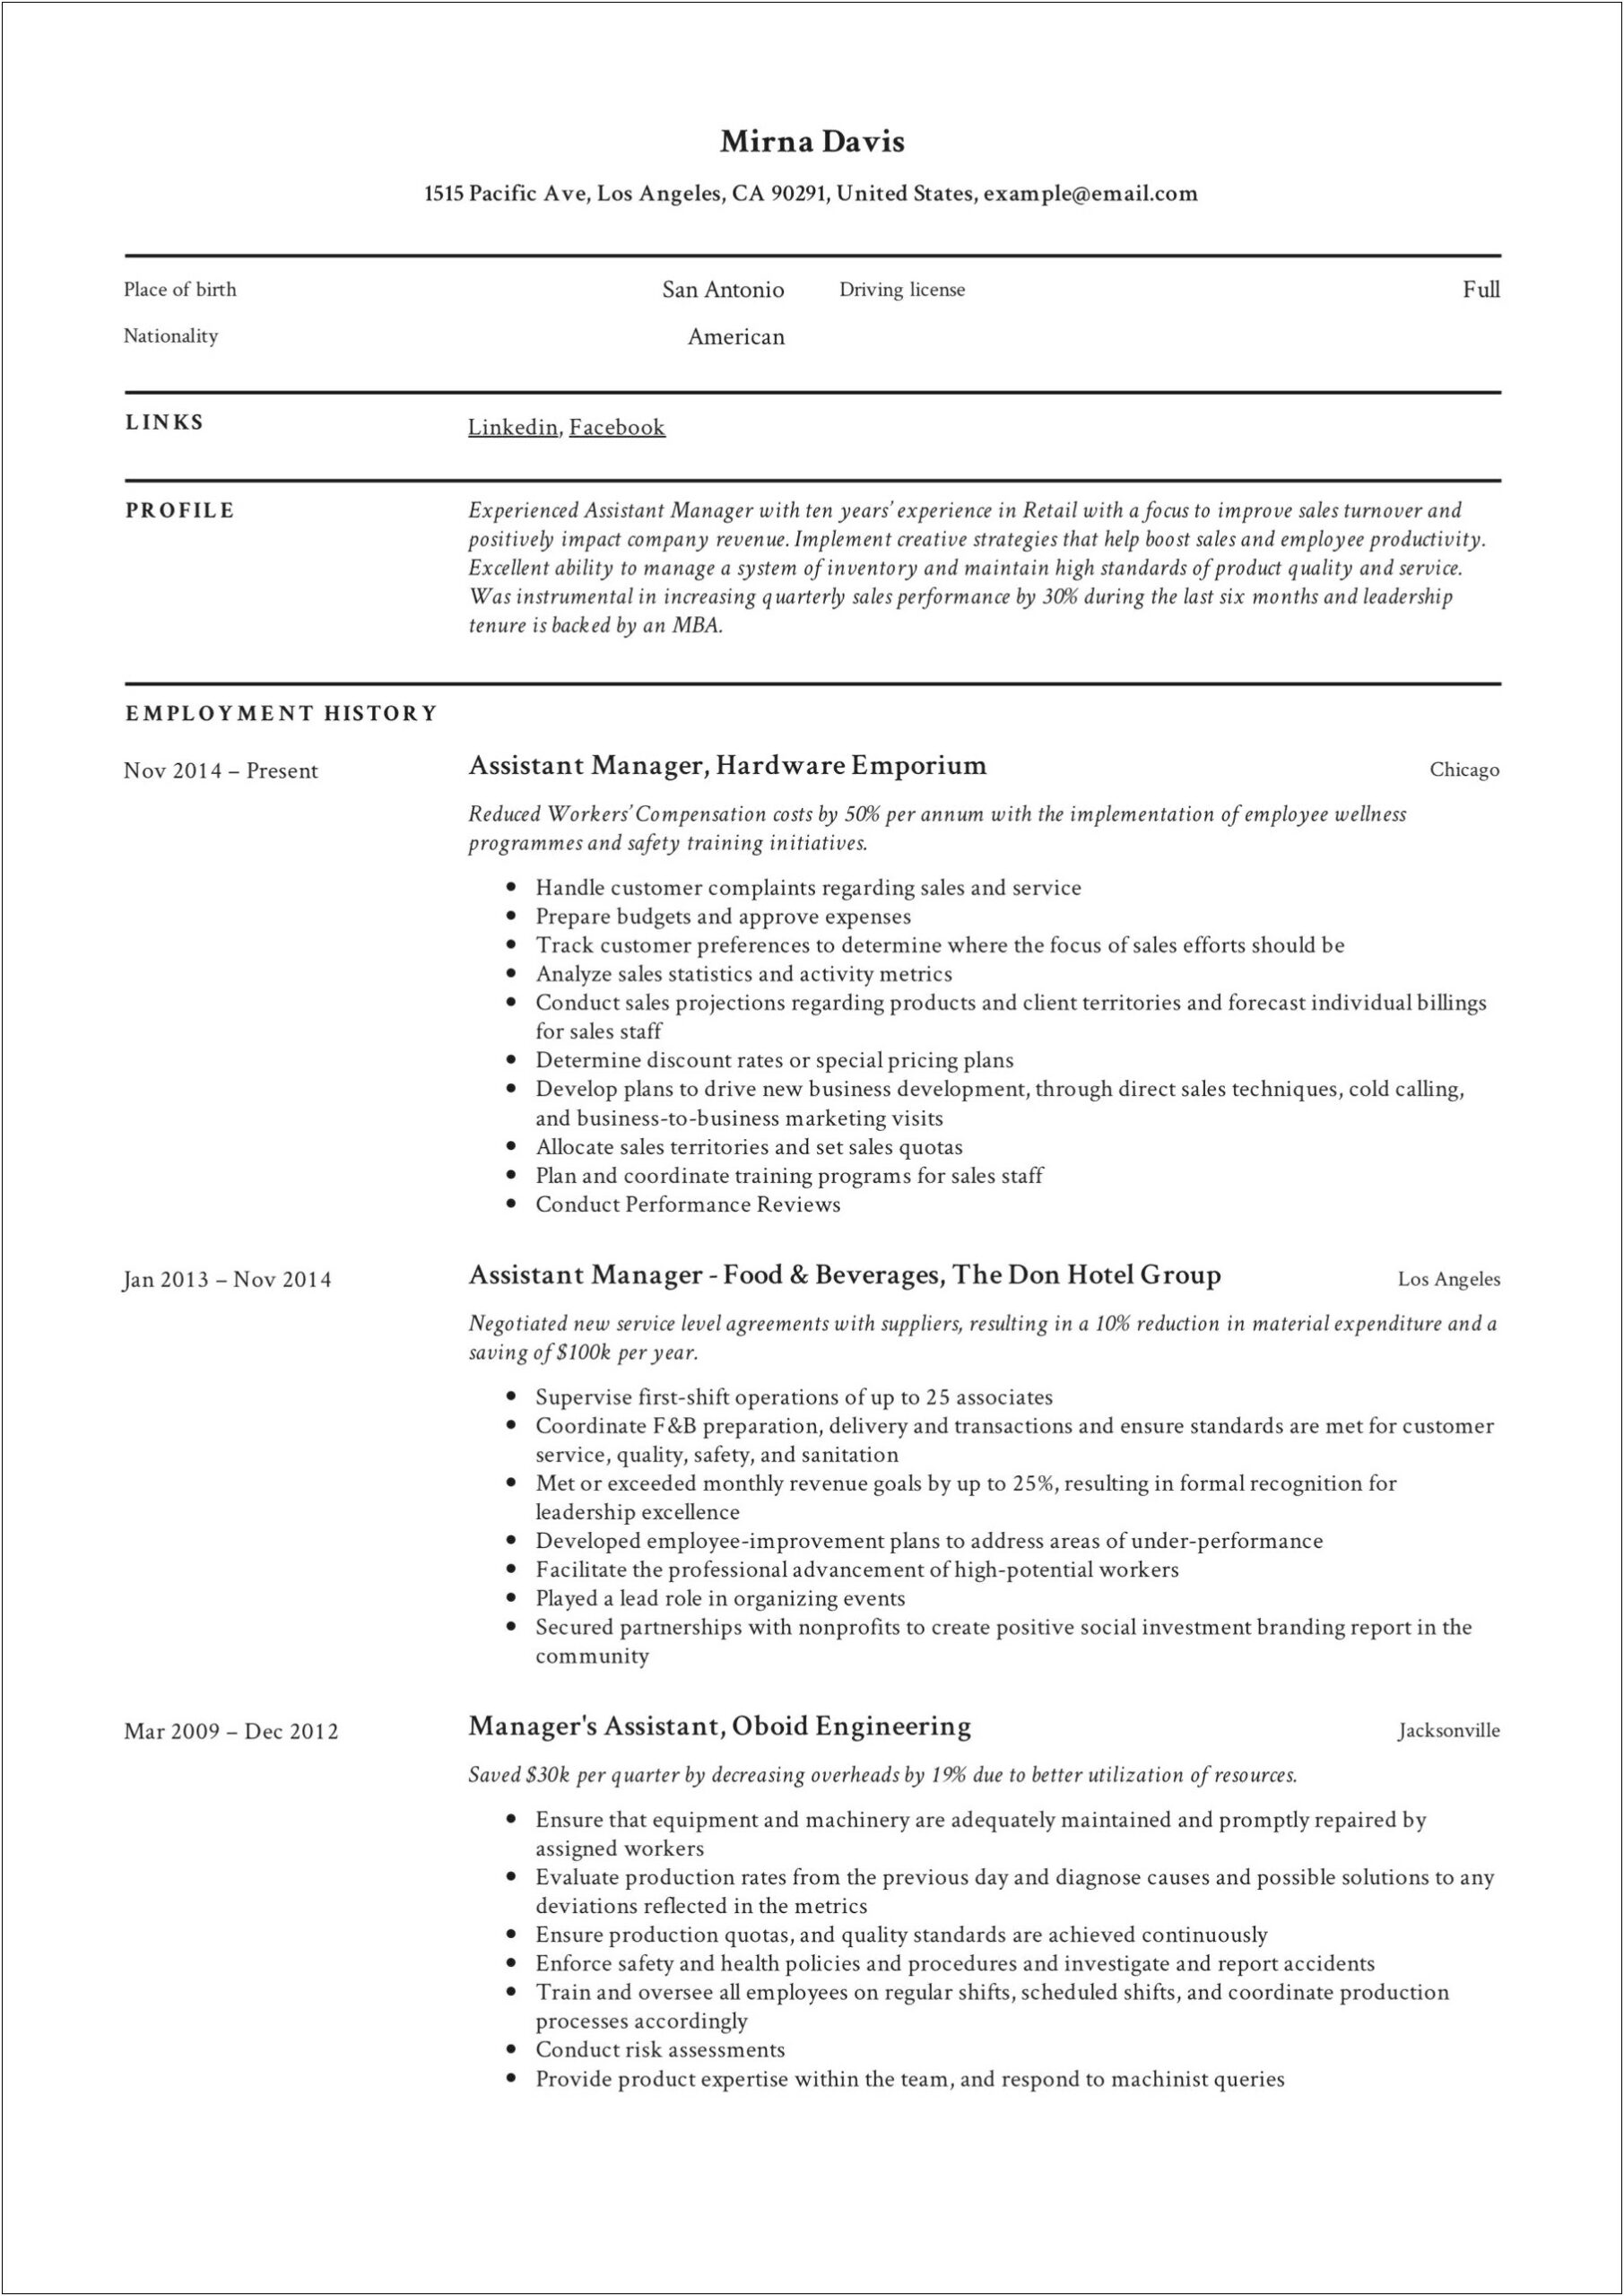 Free Resume For Retail Store Manager